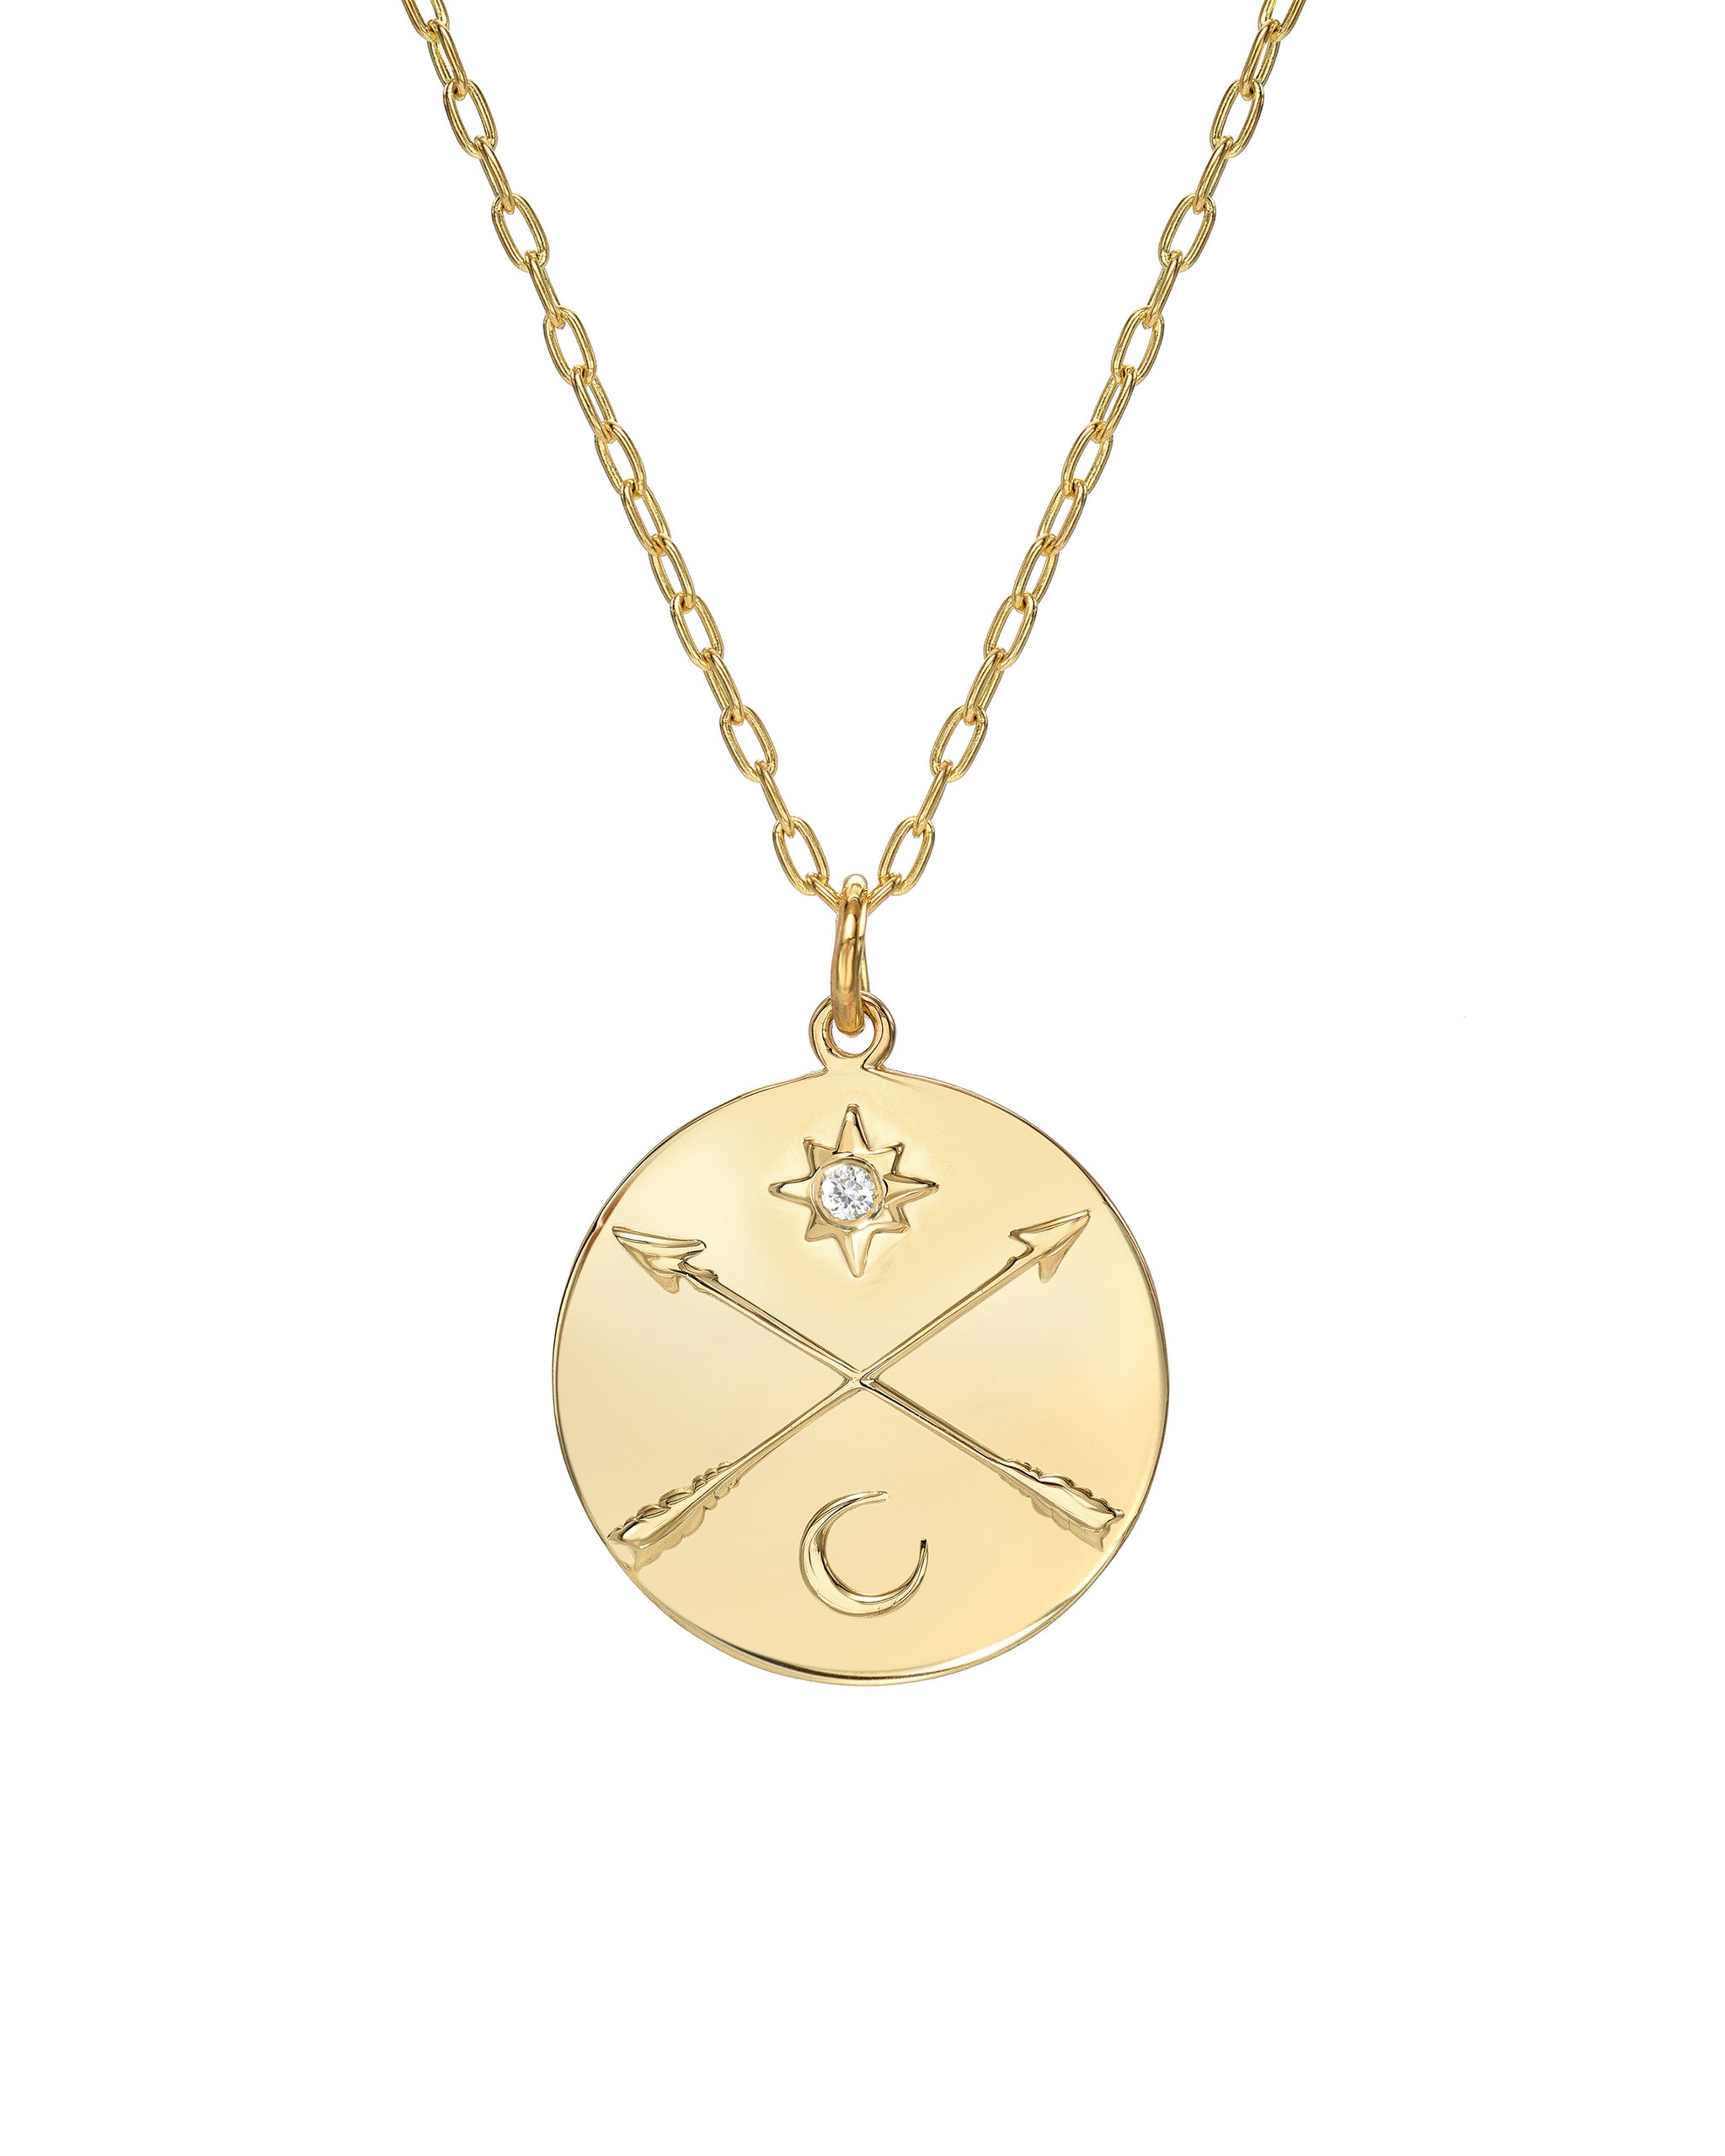 14k Yellow Gold Nomad Necklace, Crossed Arrows, Sun & Moon with Diamond or semi-precious stone, handmade by Turquoise + Tobacco in Los Angeles California